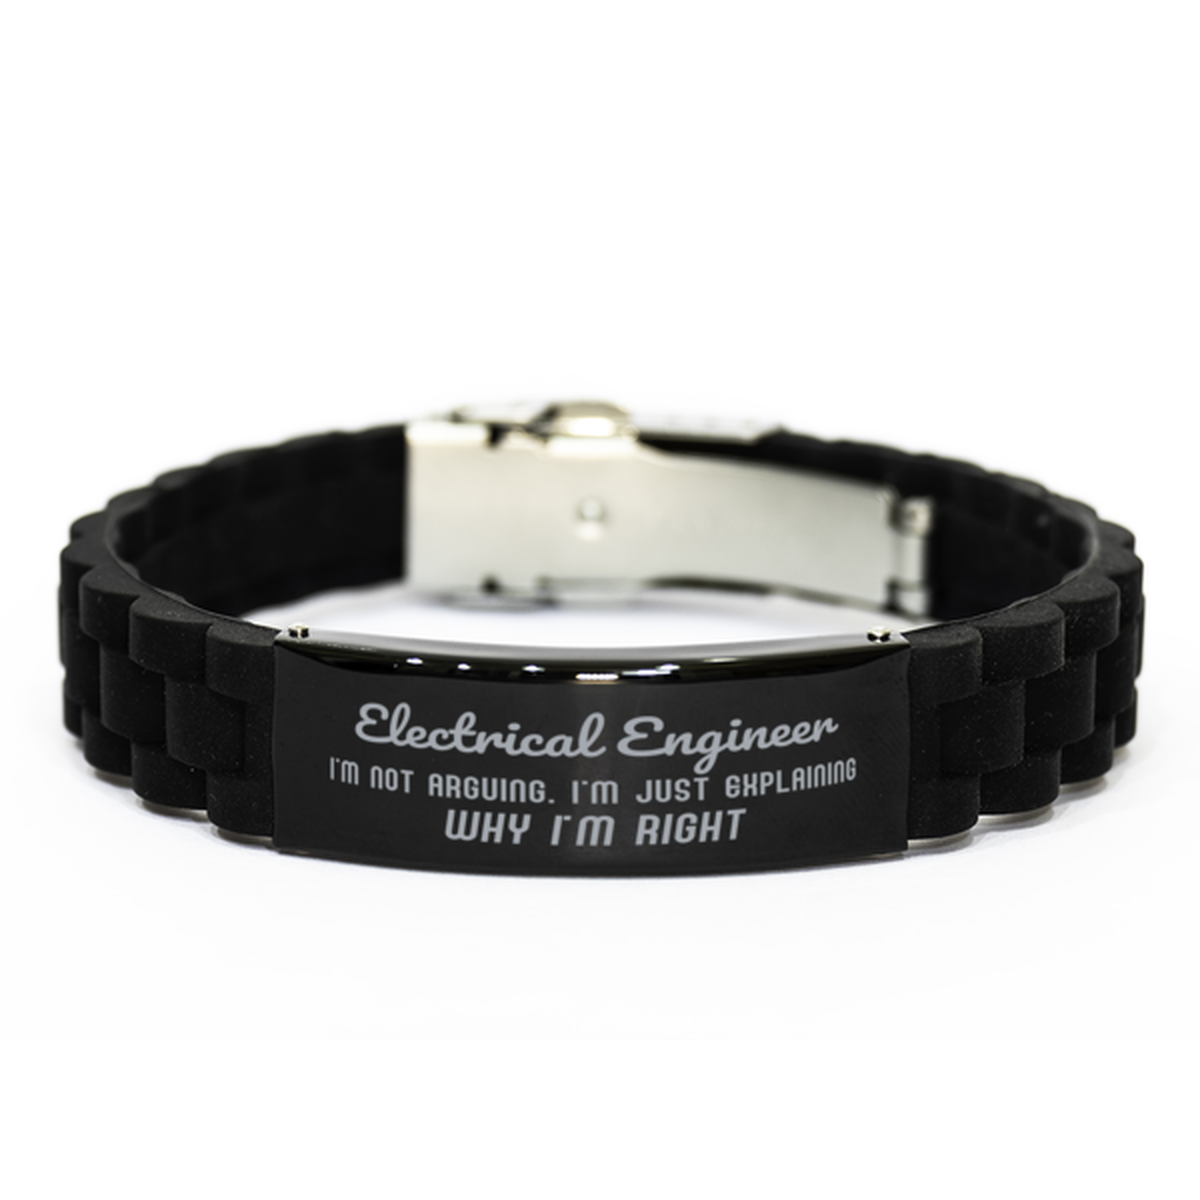 Electrical Engineer I'm not Arguing. I'm Just Explaining Why I'm RIGHT Black Glidelock Clasp Bracelet, Funny Saying Quote Electrical Engineer Gifts For Electrical Engineer Graduation Birthday Christmas Gifts for Men Women Coworker